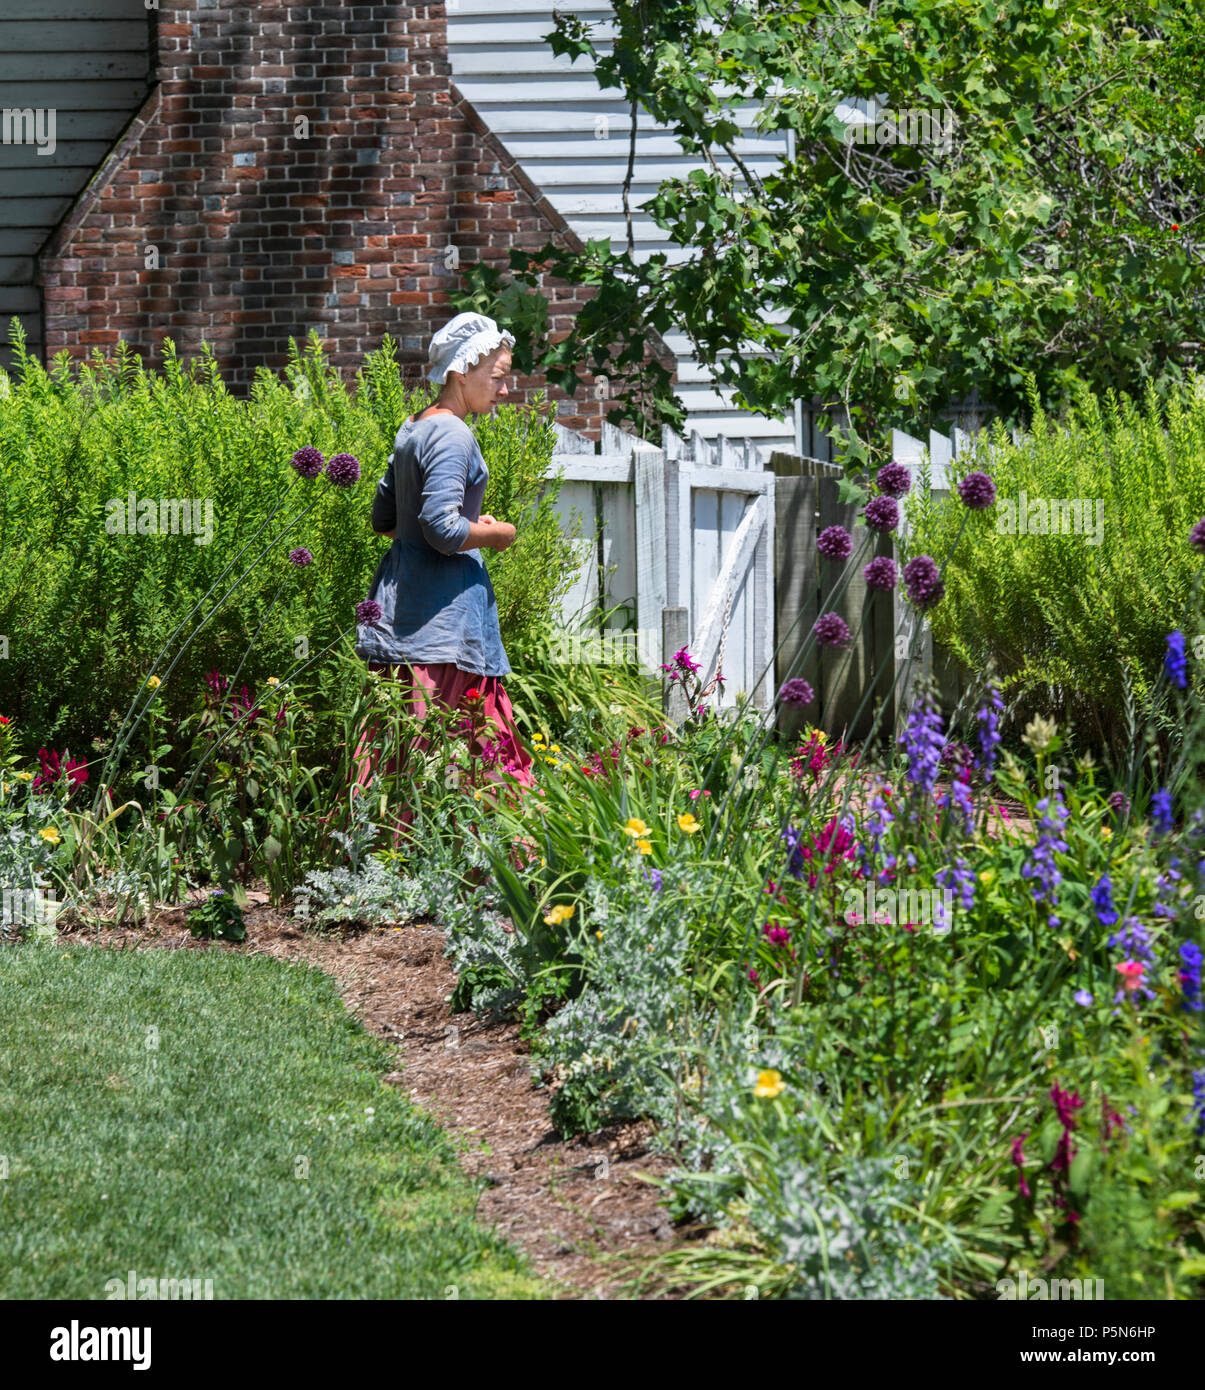 A  young Colonial Woman with a blue blouse, white cap and red skirt strolls through a flower garden in Colonial Williamsburg on a sunny summer day. Stock Photo